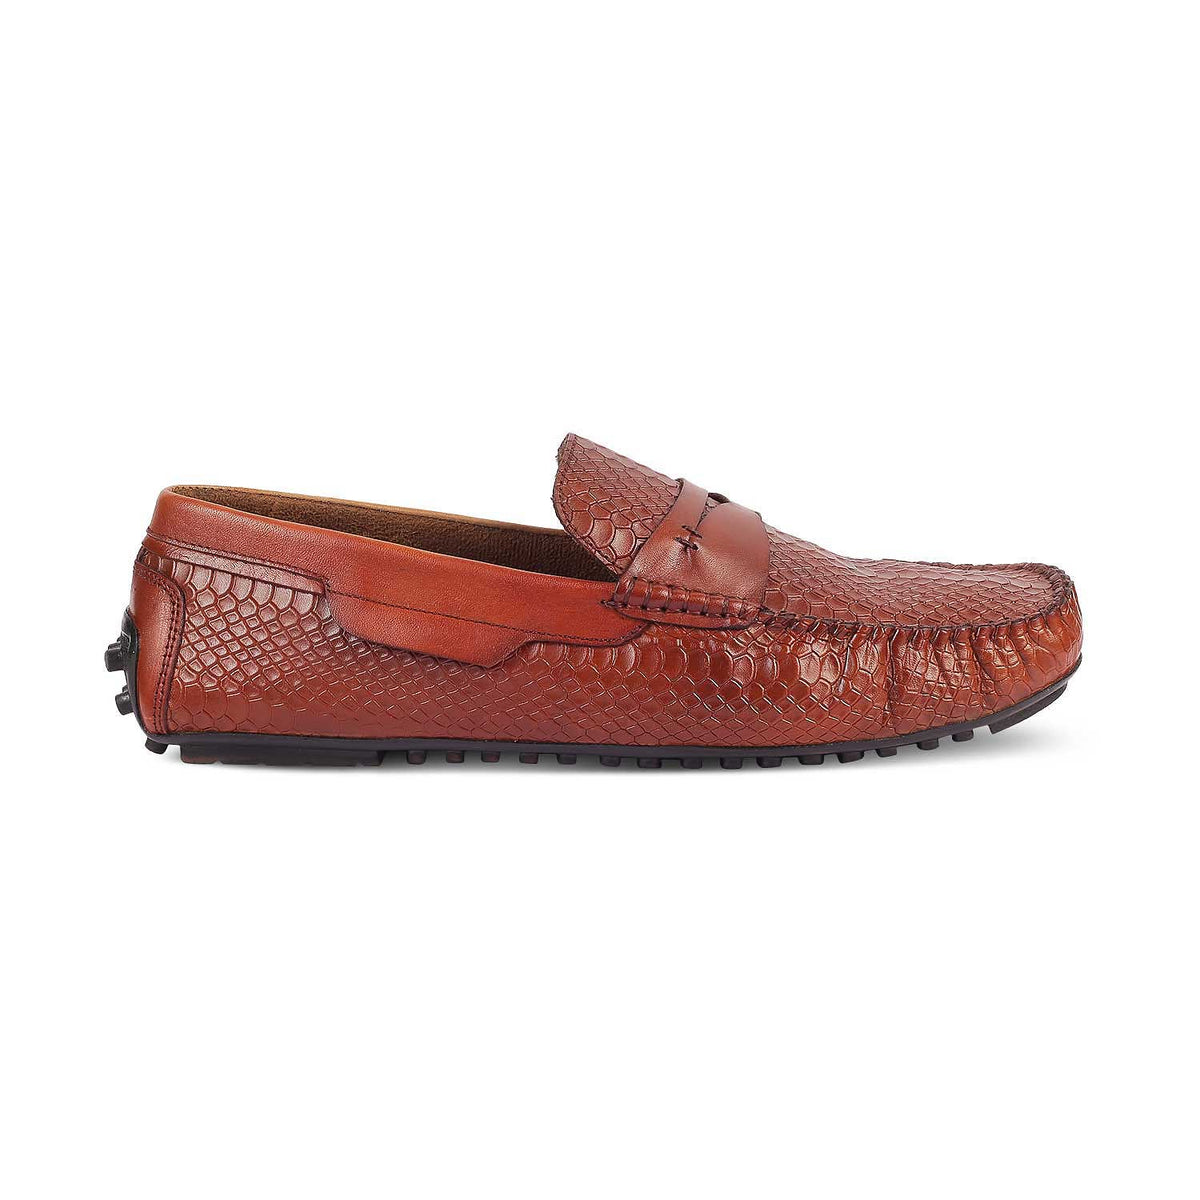 The Argon Tan Men's Leather Driving Loafers Tresmode